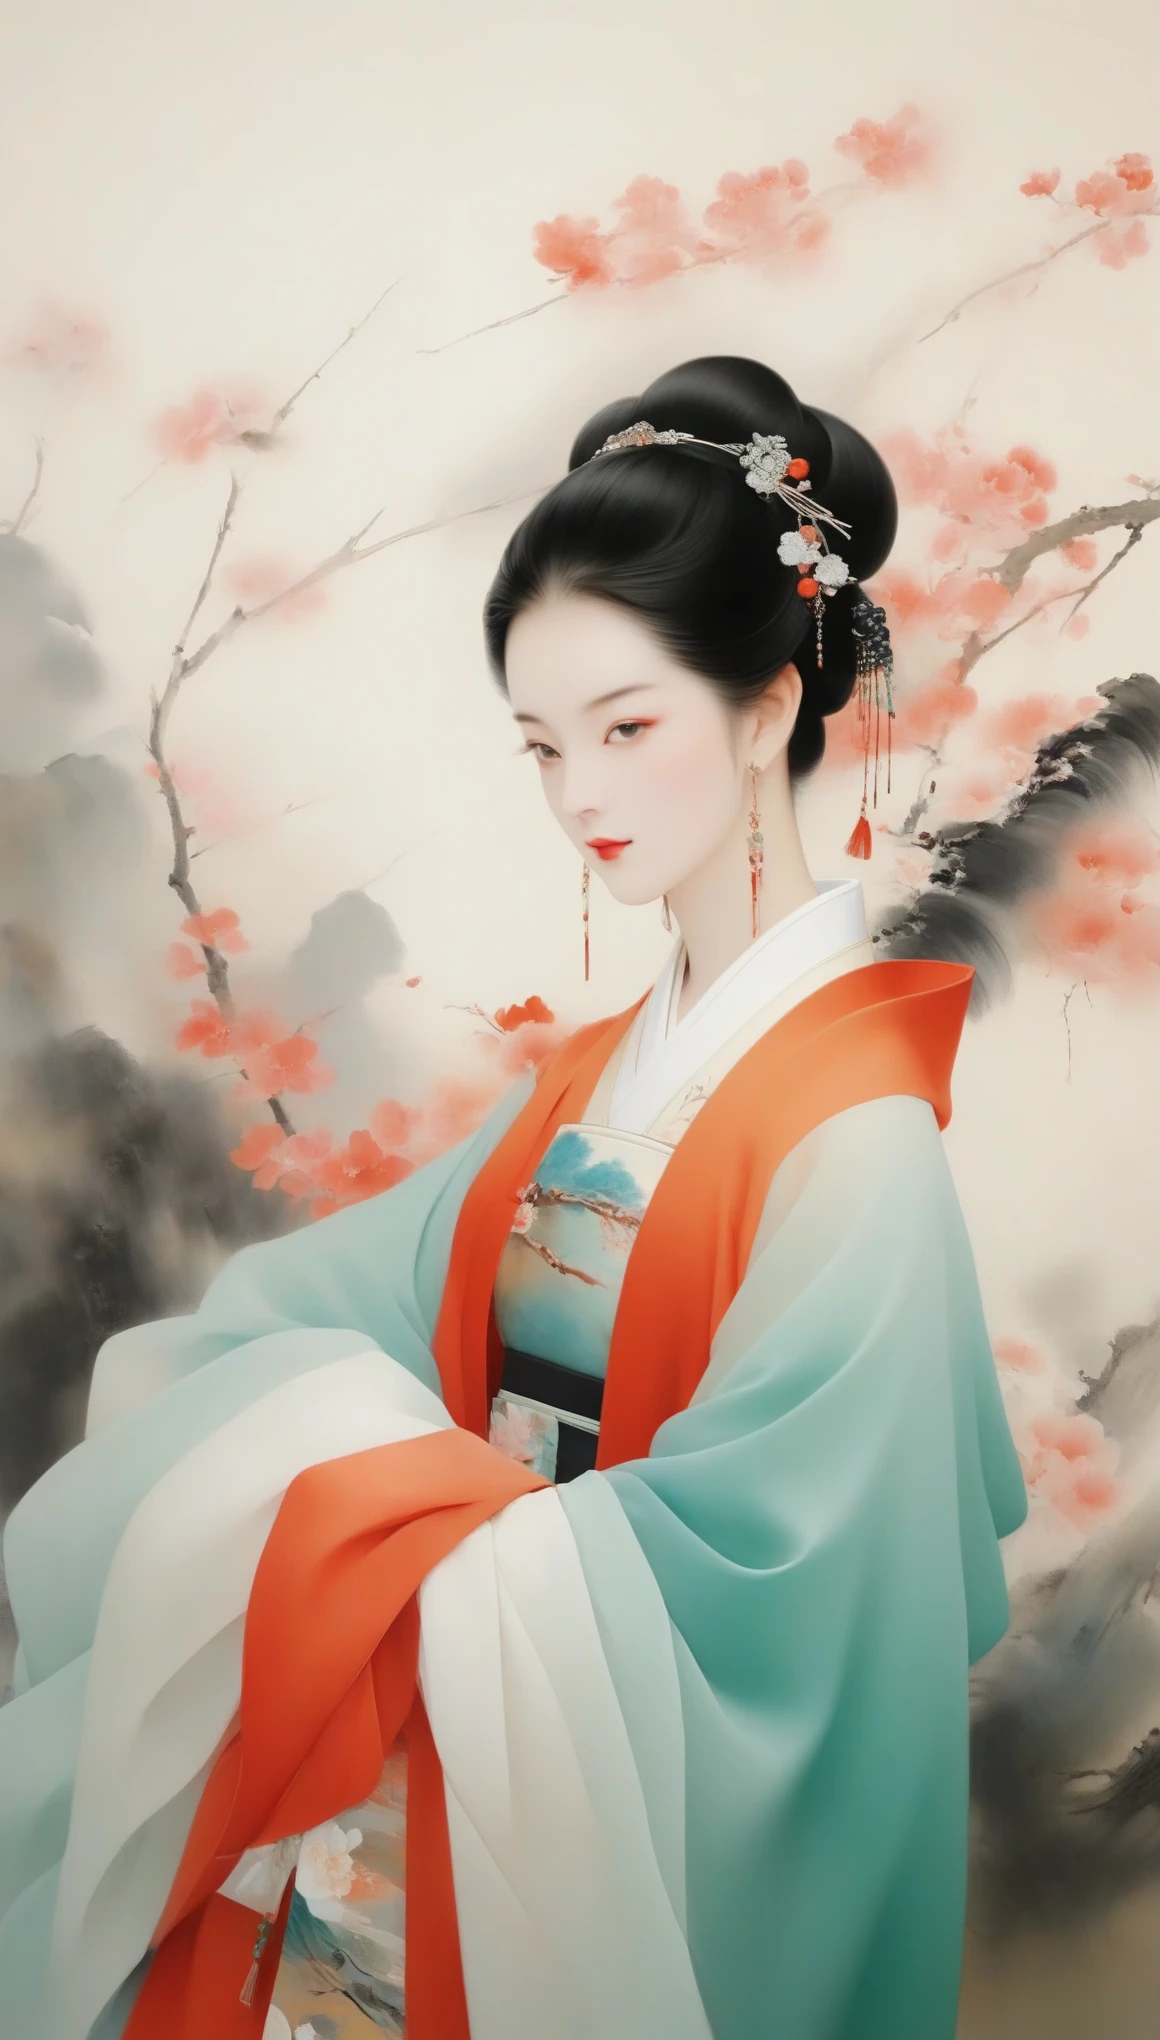 Wu Guanzhong，（Wang Zhaojun, a beauty from the Western Han Dynasty in China, holding a lute：0.13），（whole body），（Han Dynasty red hooded cloak costume），（lute），（Velvet）（mink clothes），Background is the desert with a plump and rounded appearance，Round face shape，The eyes are not big，Small nose，Lips are red and slightly upturned，Has long black hair，background：Falling geese，Wu Guanzhong, a combination of Chinese and Western，His oil paintings are fresh、Bright，Full of national characteristics and lyrical meaning。Later he engaged in innovating ink painting，His paintings are somewhere between figuration and abstraction，Points to note、The rhythm of blending lines and ink blocks，With strong artistic personality and modern flavor。